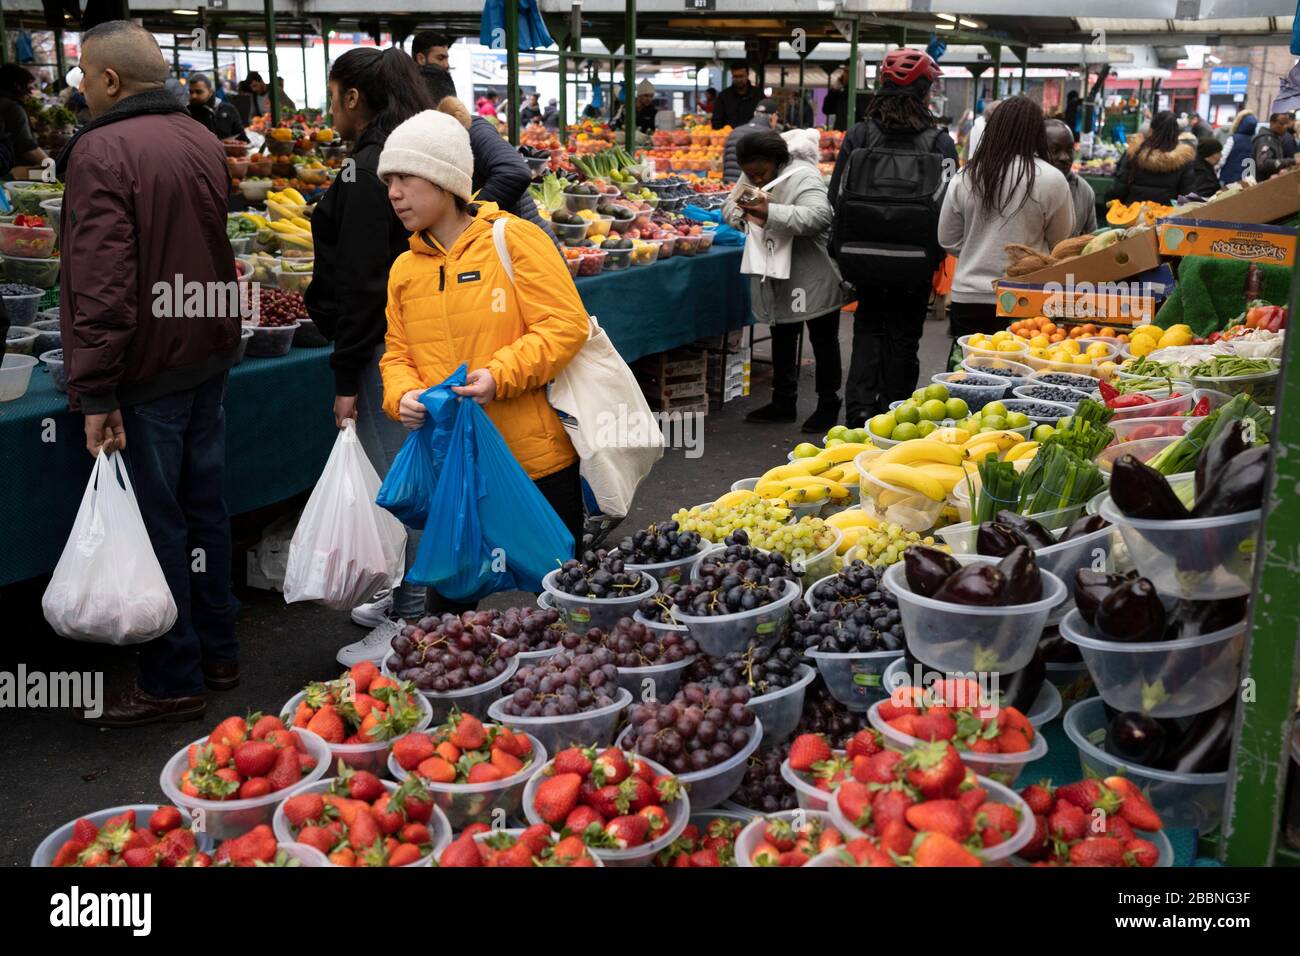 People out shopping in Bullring Open Market, an outdoor food, fruit and vegetable market in central Birmingham on 14th March 2020 in Birmingham, United Kingdom. The Open Market offers a huge variety of fresh fruit and vegetables, fabrics, household items and seasonal goods. The Bull Ring Open Market has 130 stalls. Stock Photo